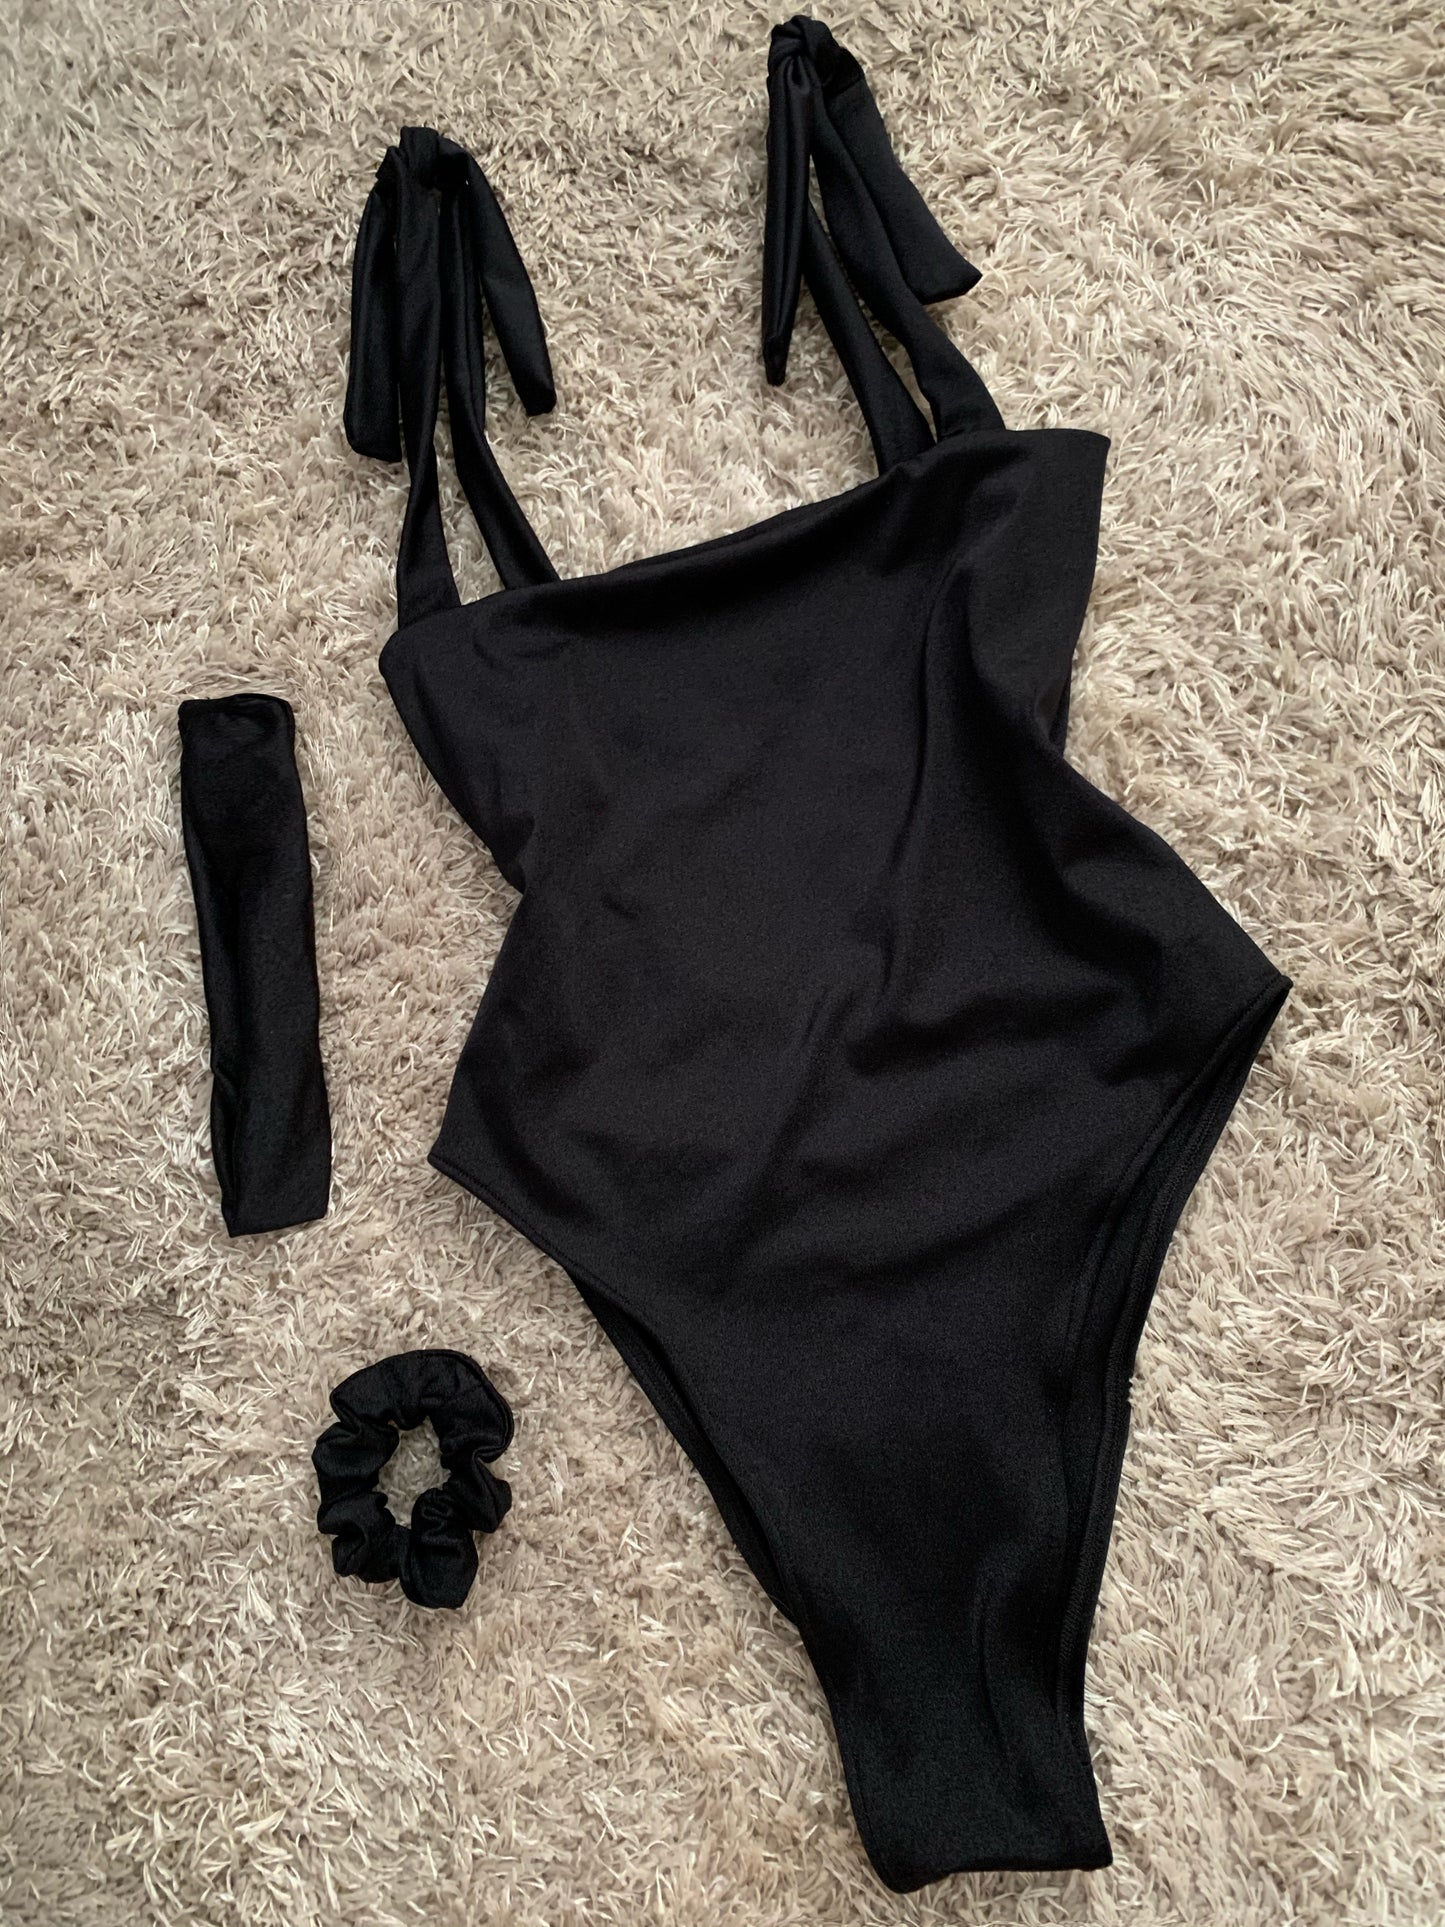 SALE Black Swimsuit with Straps UK 6